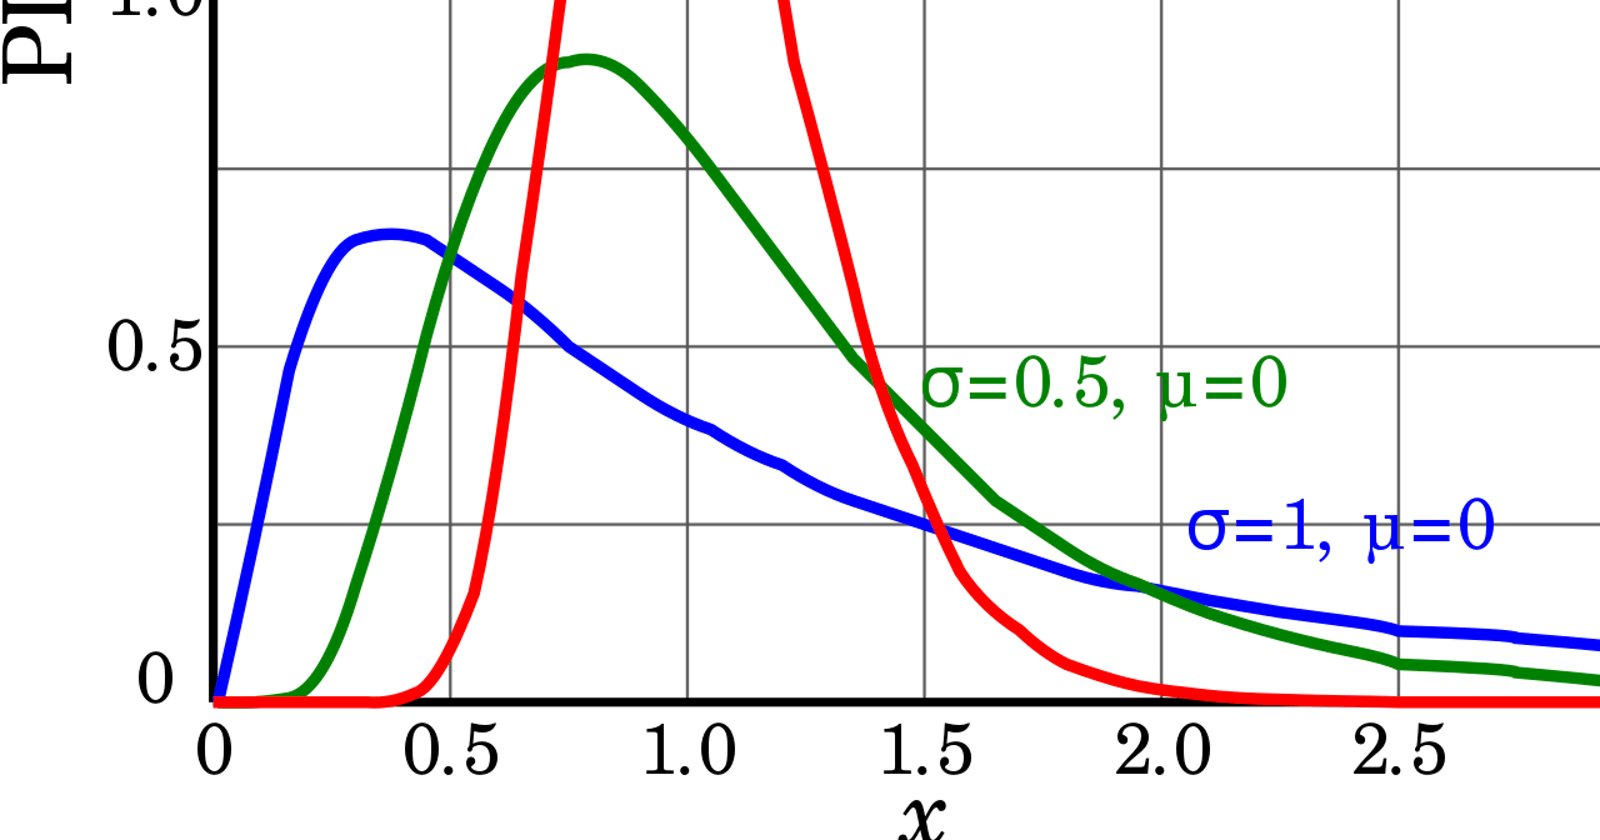 Sums of independent, identically distributed lognormal distributions